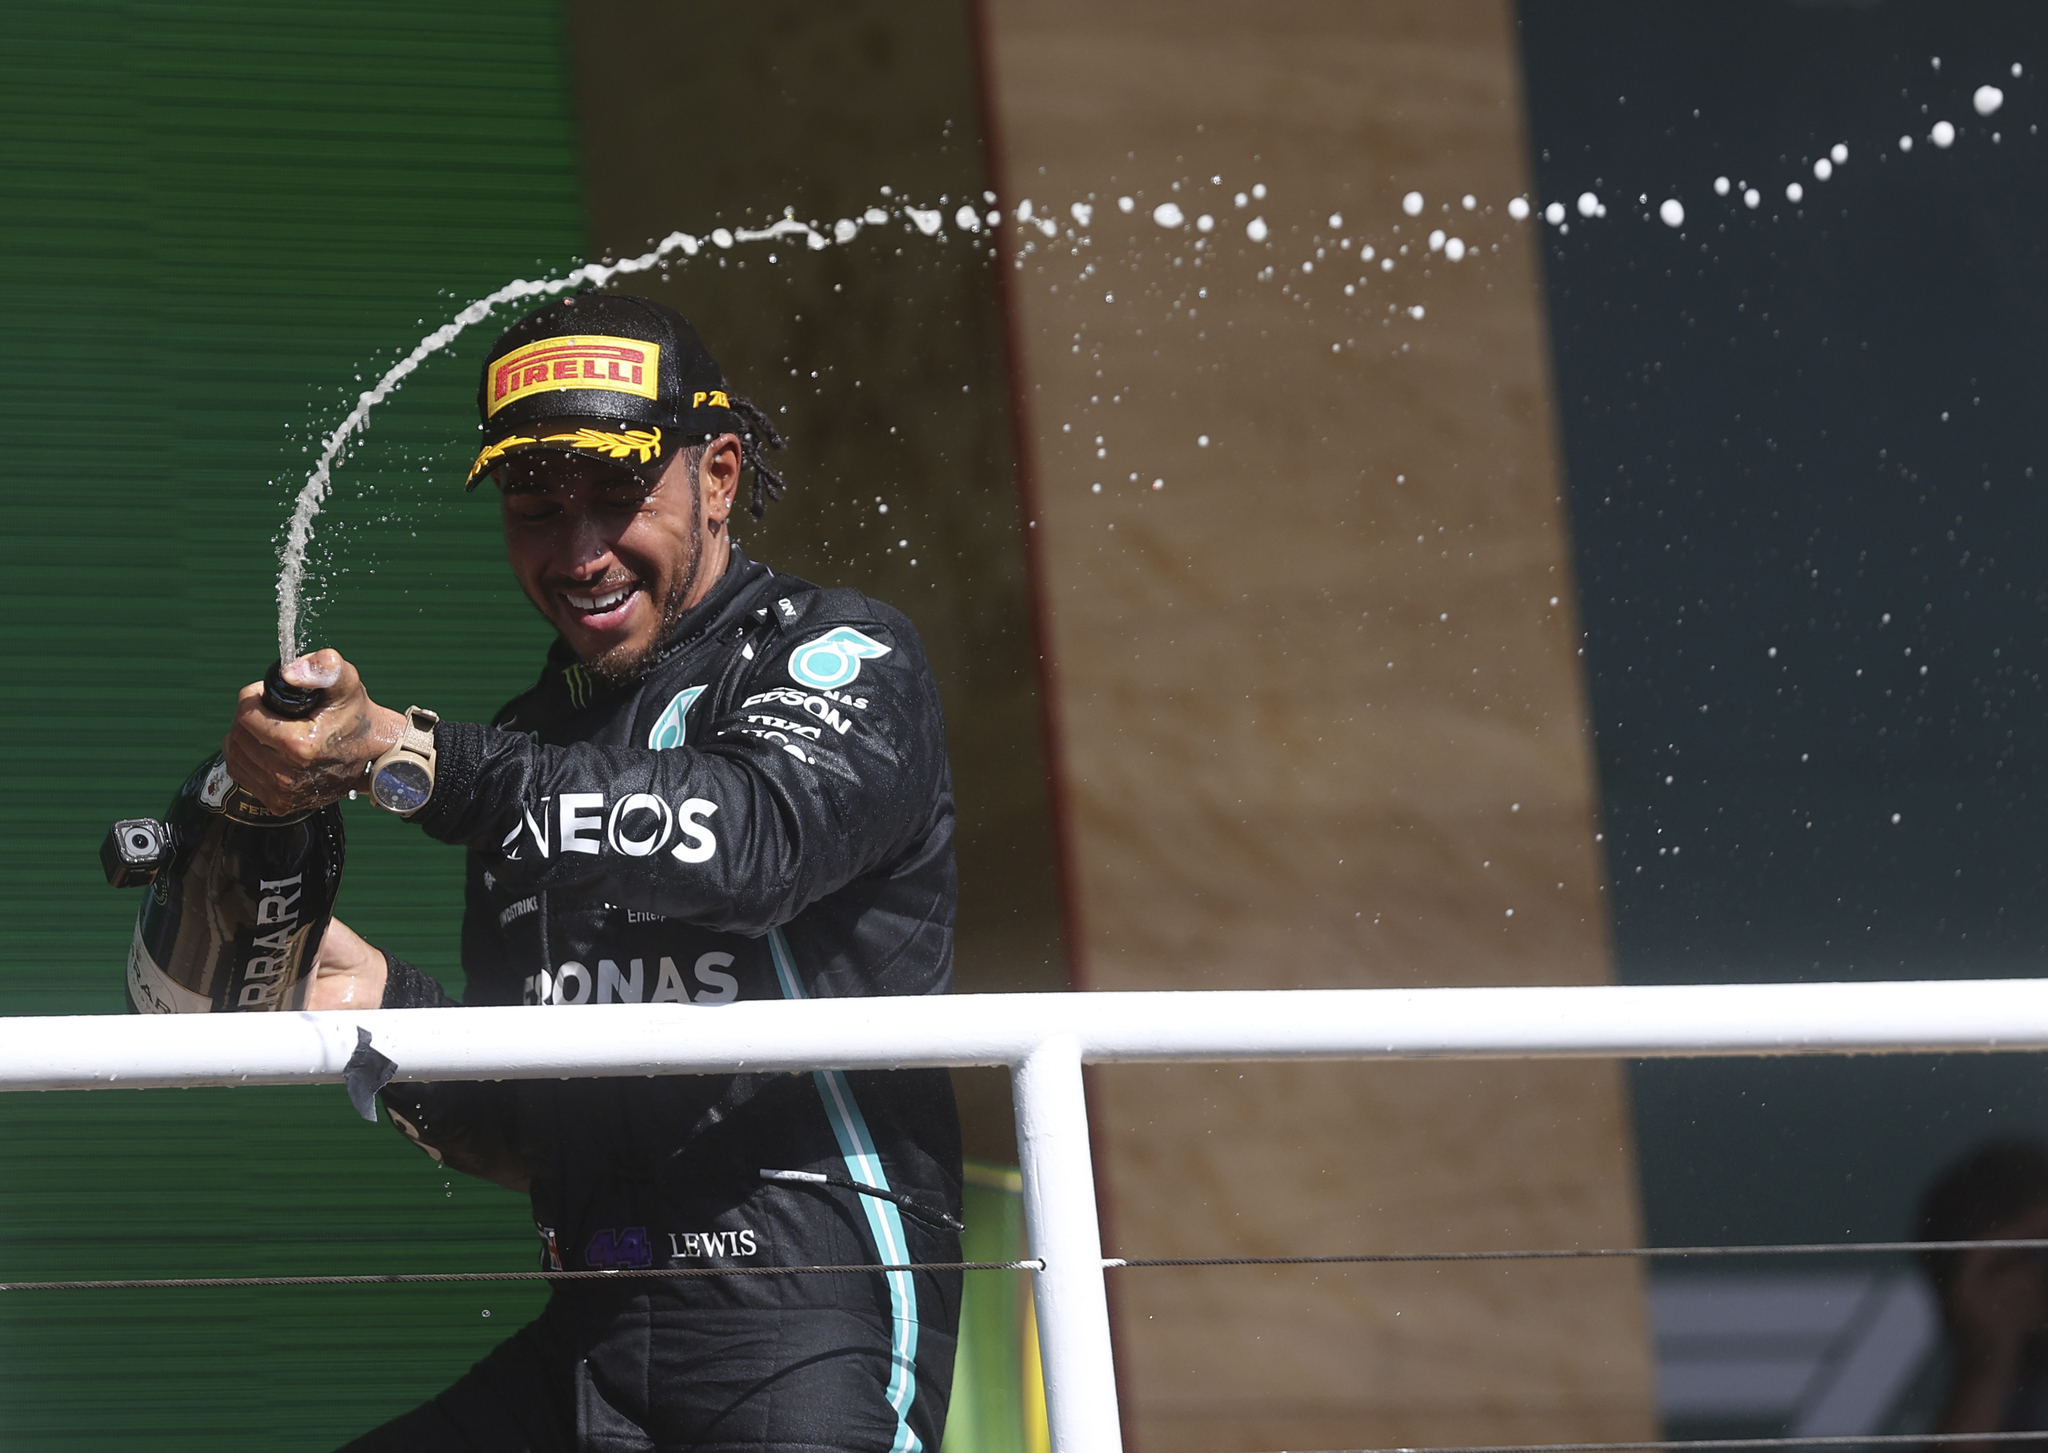 Mercedes driver Lewis lt;HIT gt;Hamilton lt;/HIT gt;, of Britain, celebrates his come from behind victory in the Brazilian Formula One Grand Prix in Sao Paulo, Brazil, Sunday, Nov. 14, 2021. (Lars Baron, Pool Photo via AP)